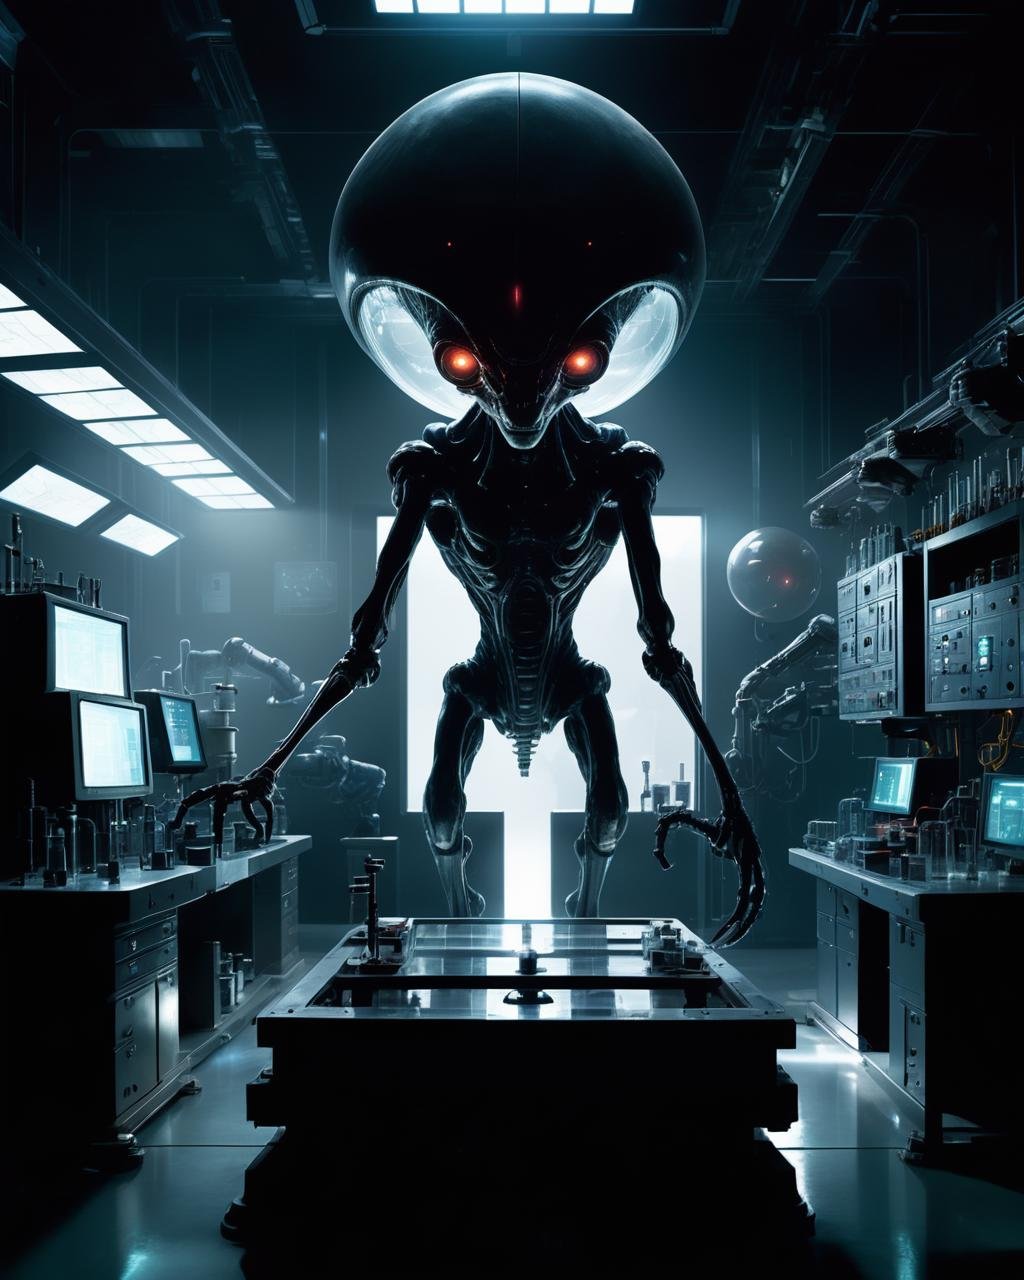 -An eerie sci-fi scene set in a shadowy laboratory, where a team of scientists is conducting experiments on a mysterious alien artifact. Detailed machinery, scientific instruments, and complex computer interfaces create a sense of authenticity and realism, while ominous lighting and a sense of foreboding add tension and suspense.